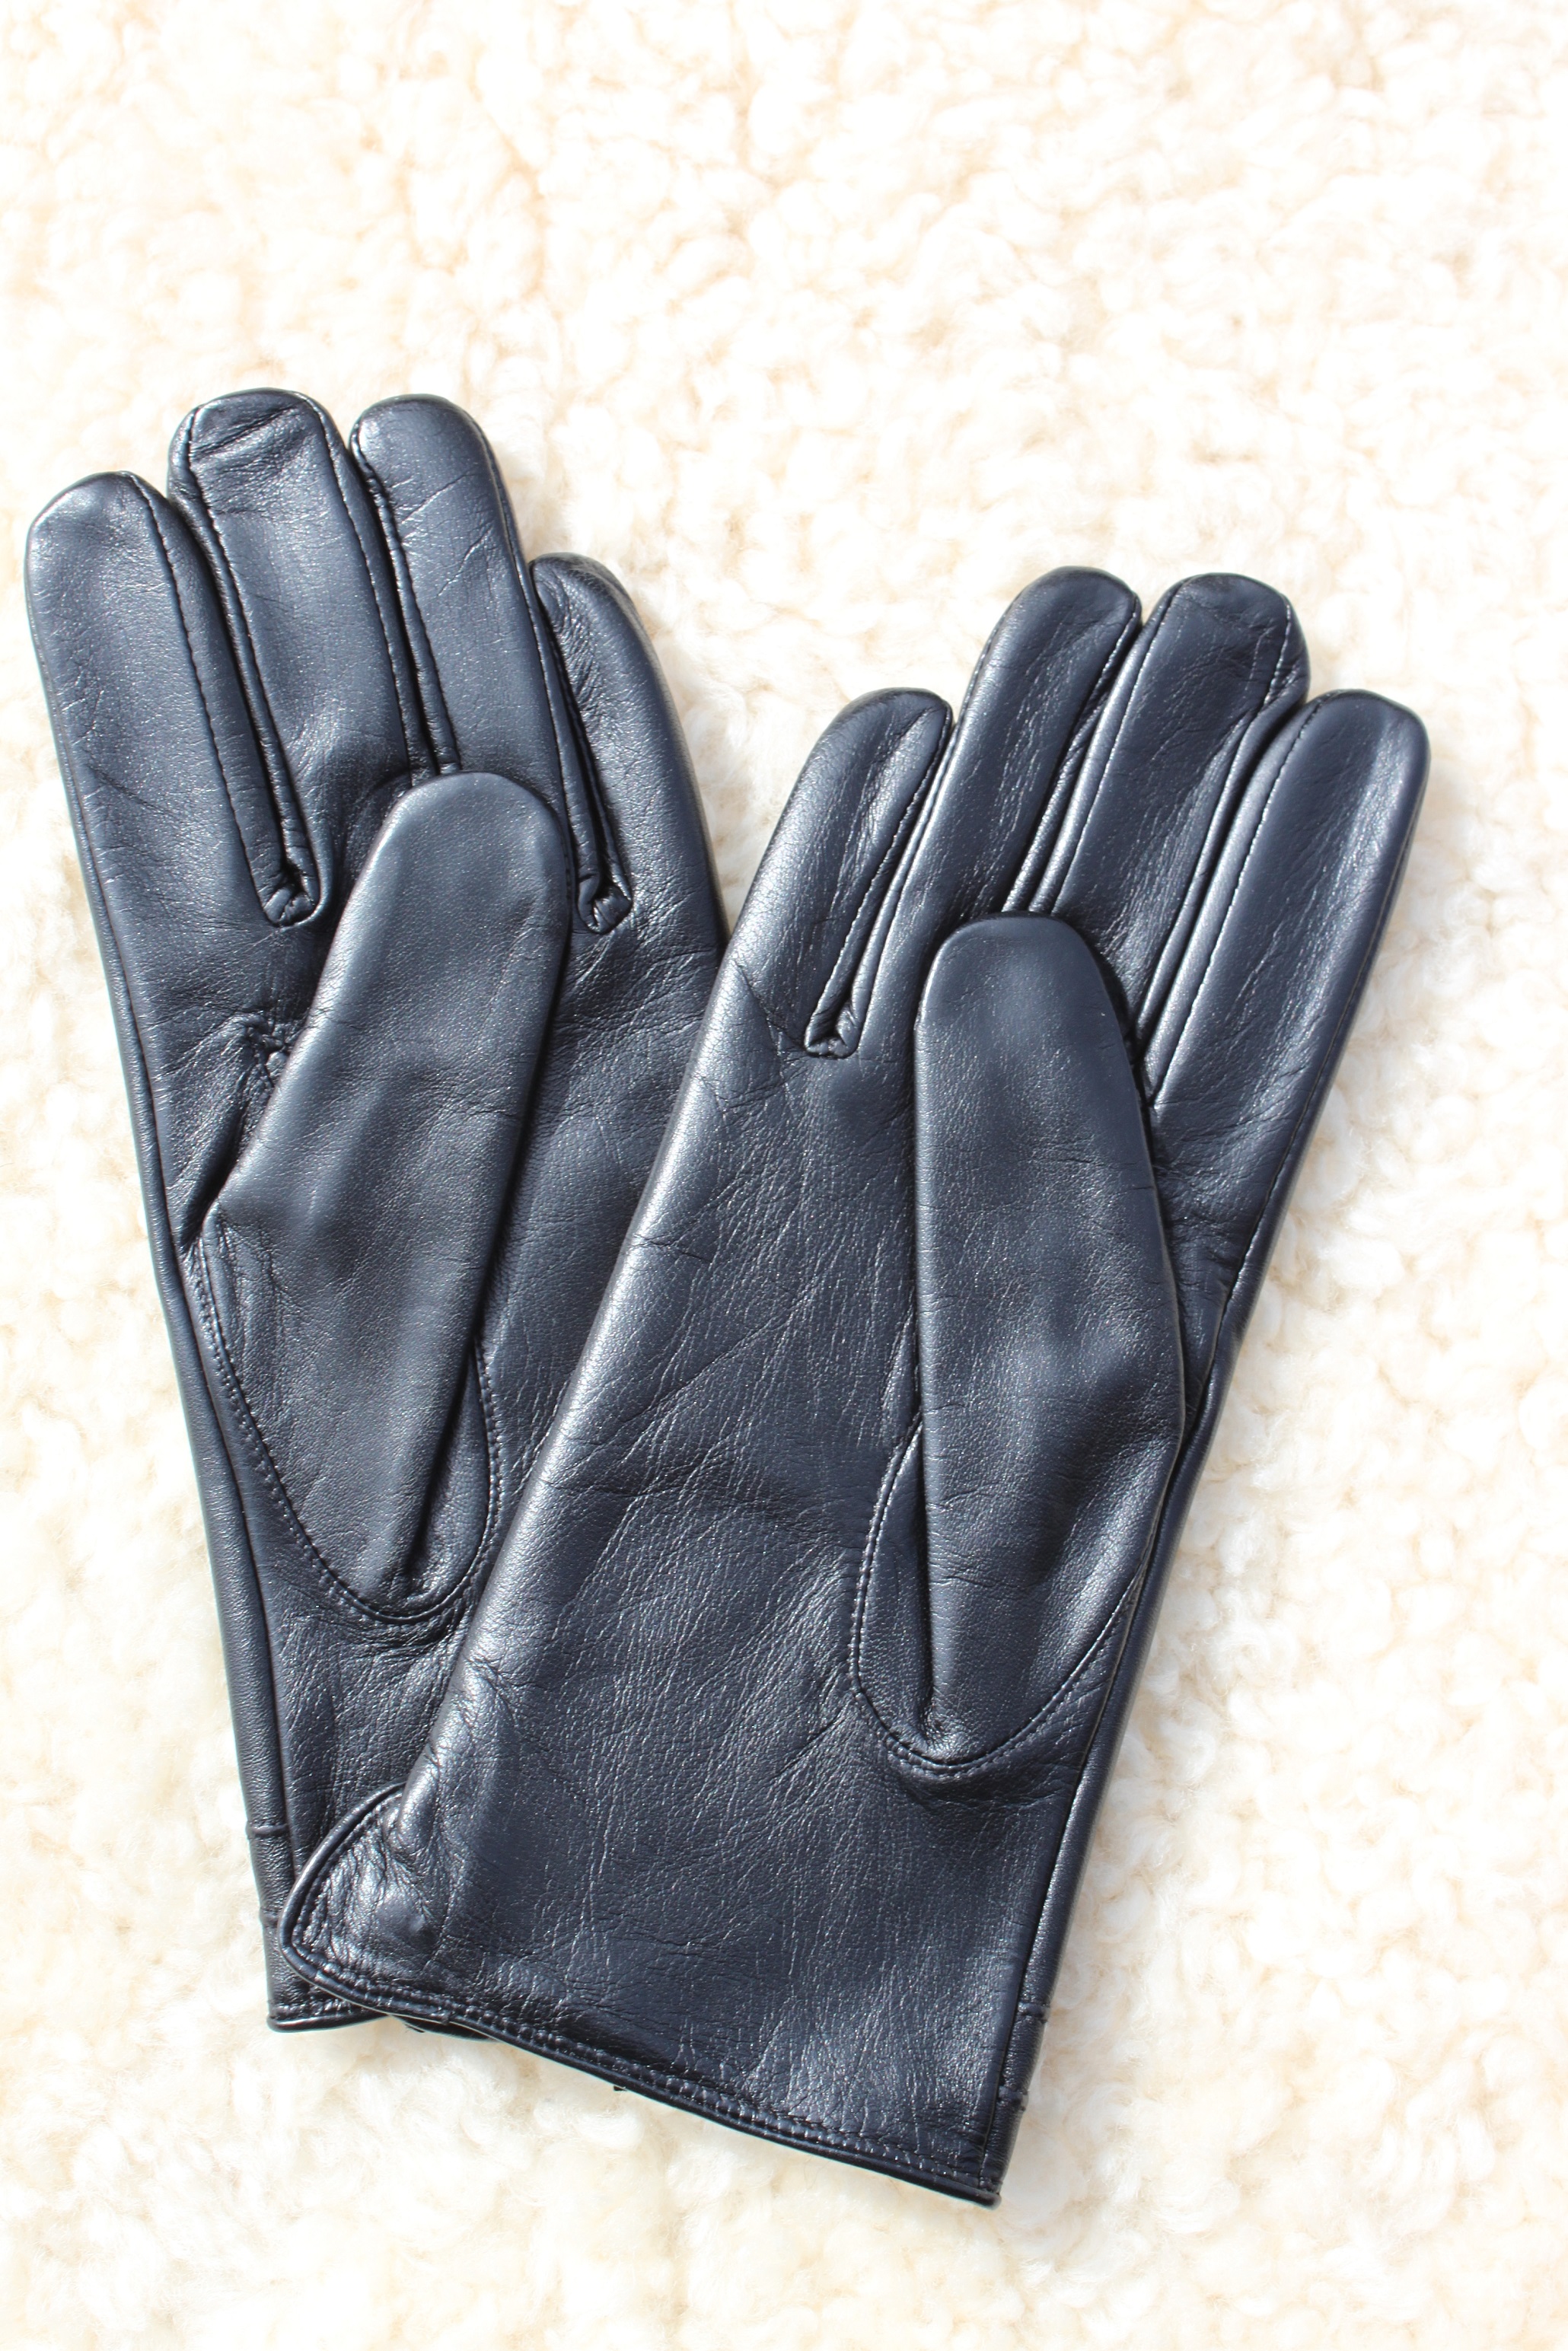 Ladies Leather Gloves - Radford Leather Fashions-Quality Leather and ...